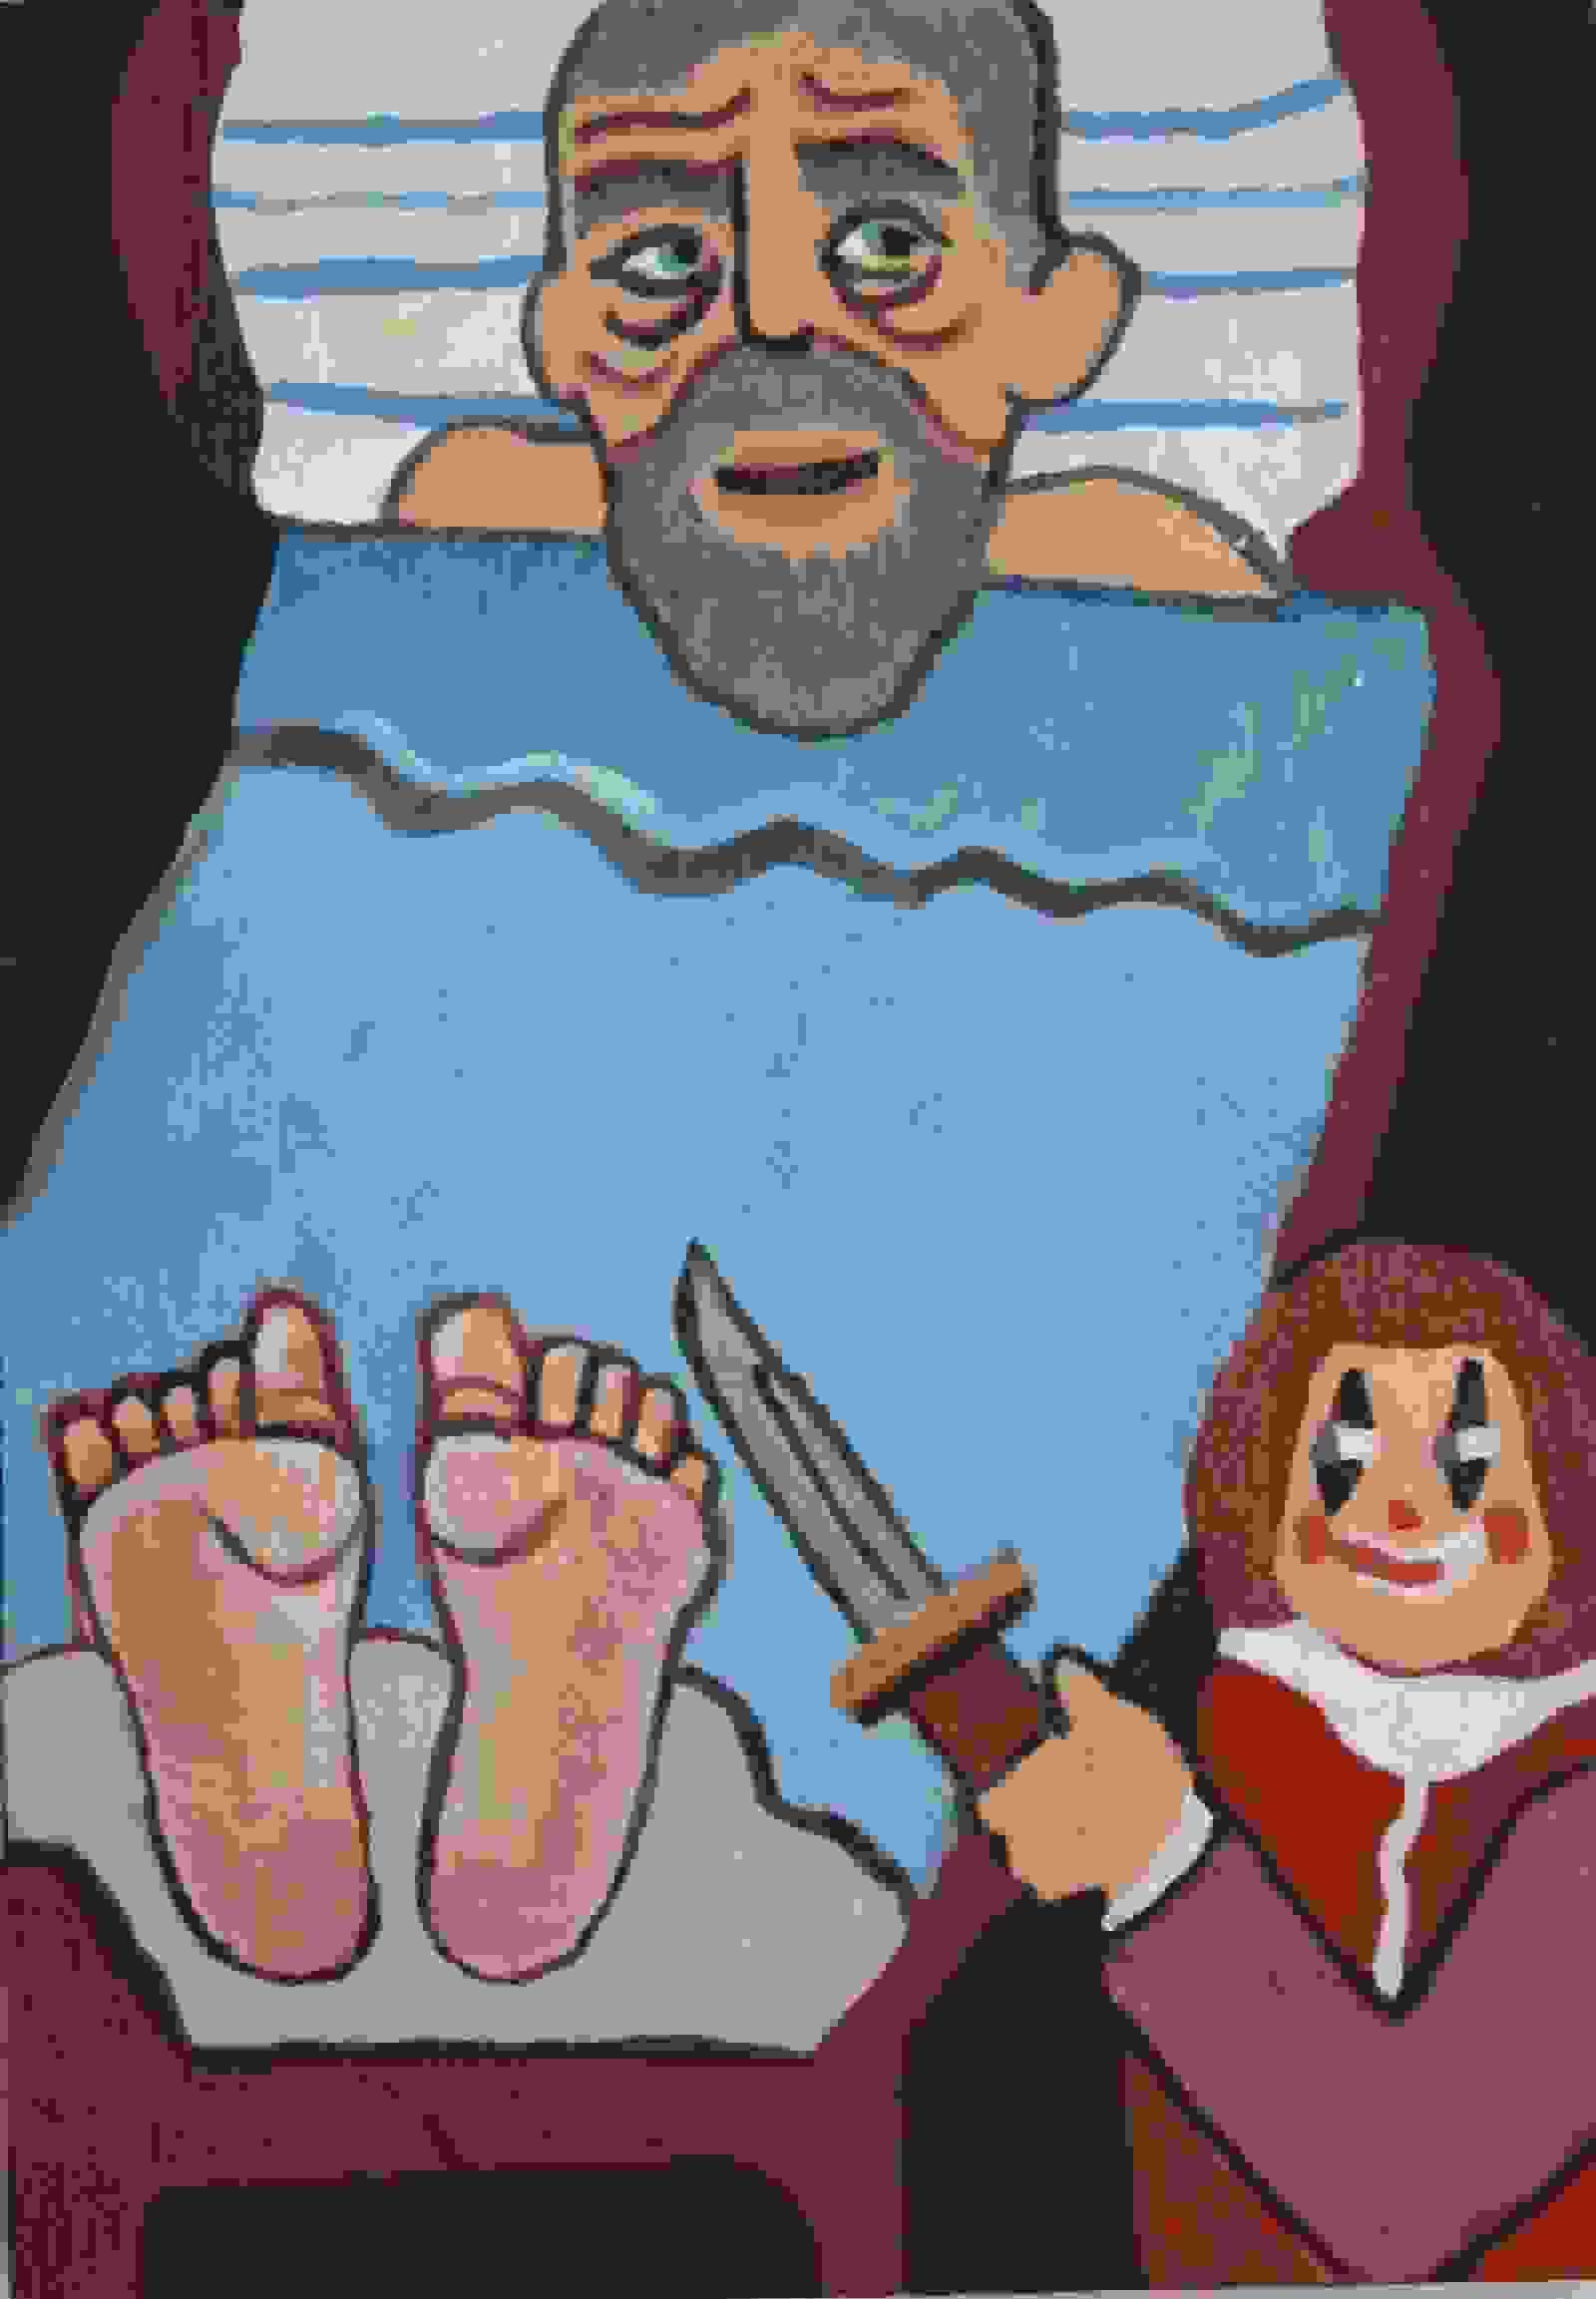 A painting of a man in bed with his head and feet peeking out from under a blue blanket. A clown sits at his feet with a knife.